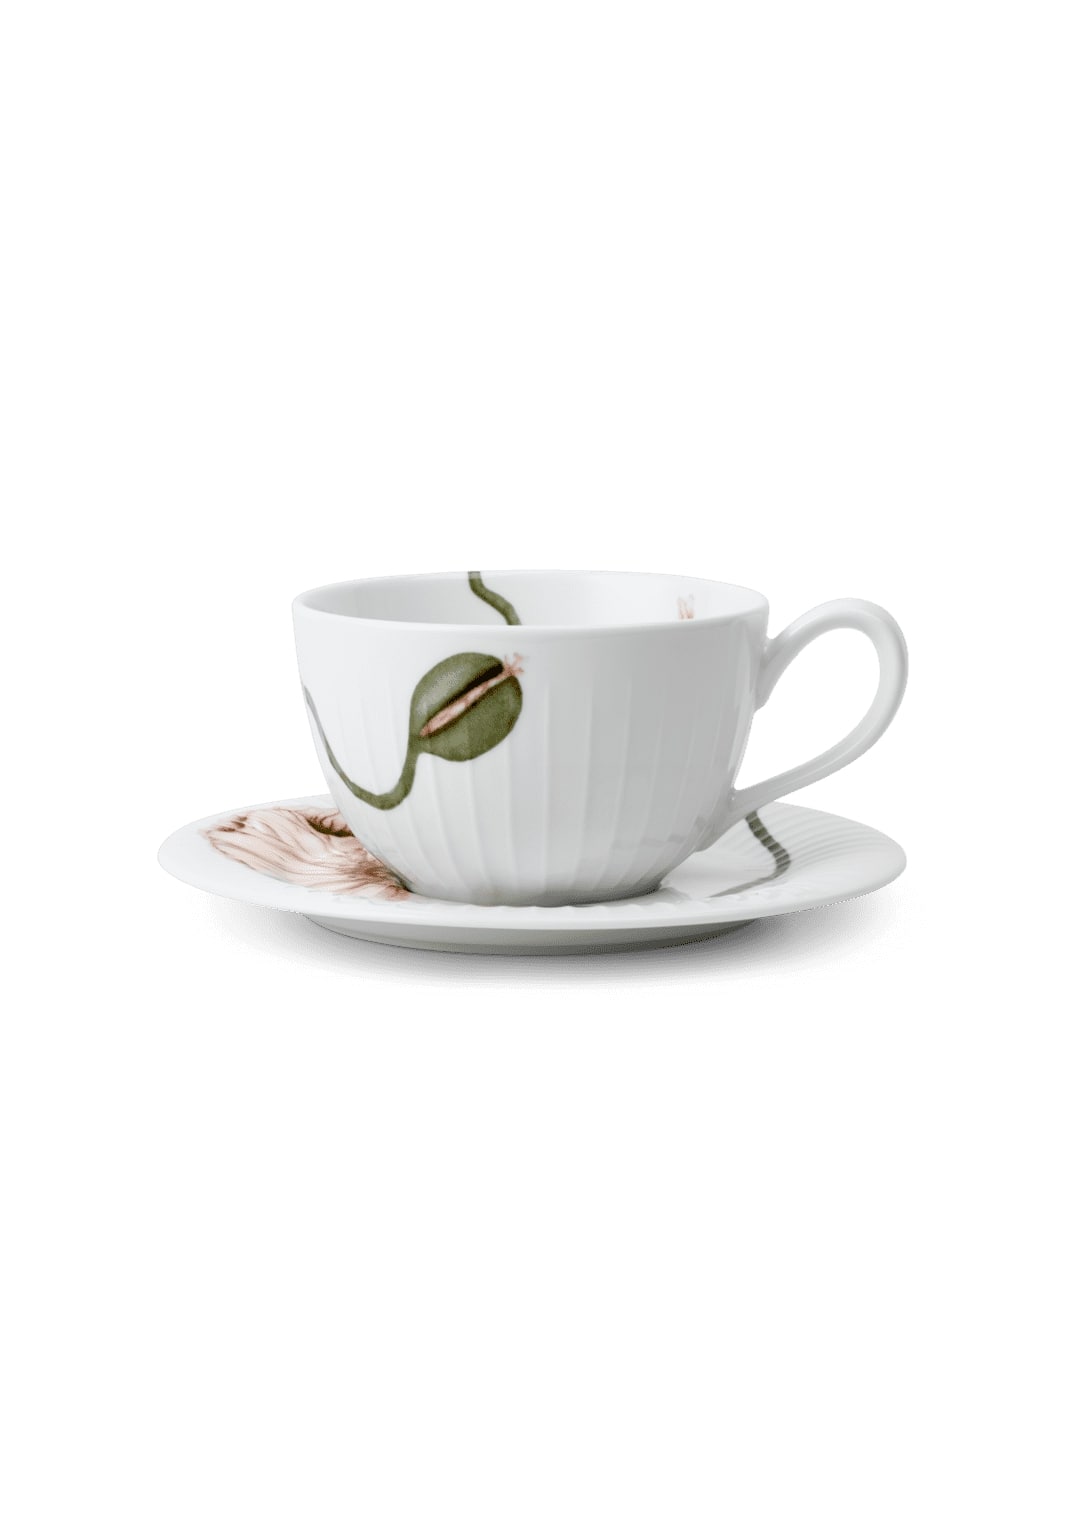 Kähler Hammershøi Poppy Tea Cup With Matching Saucer 38 Cl White W. Deco